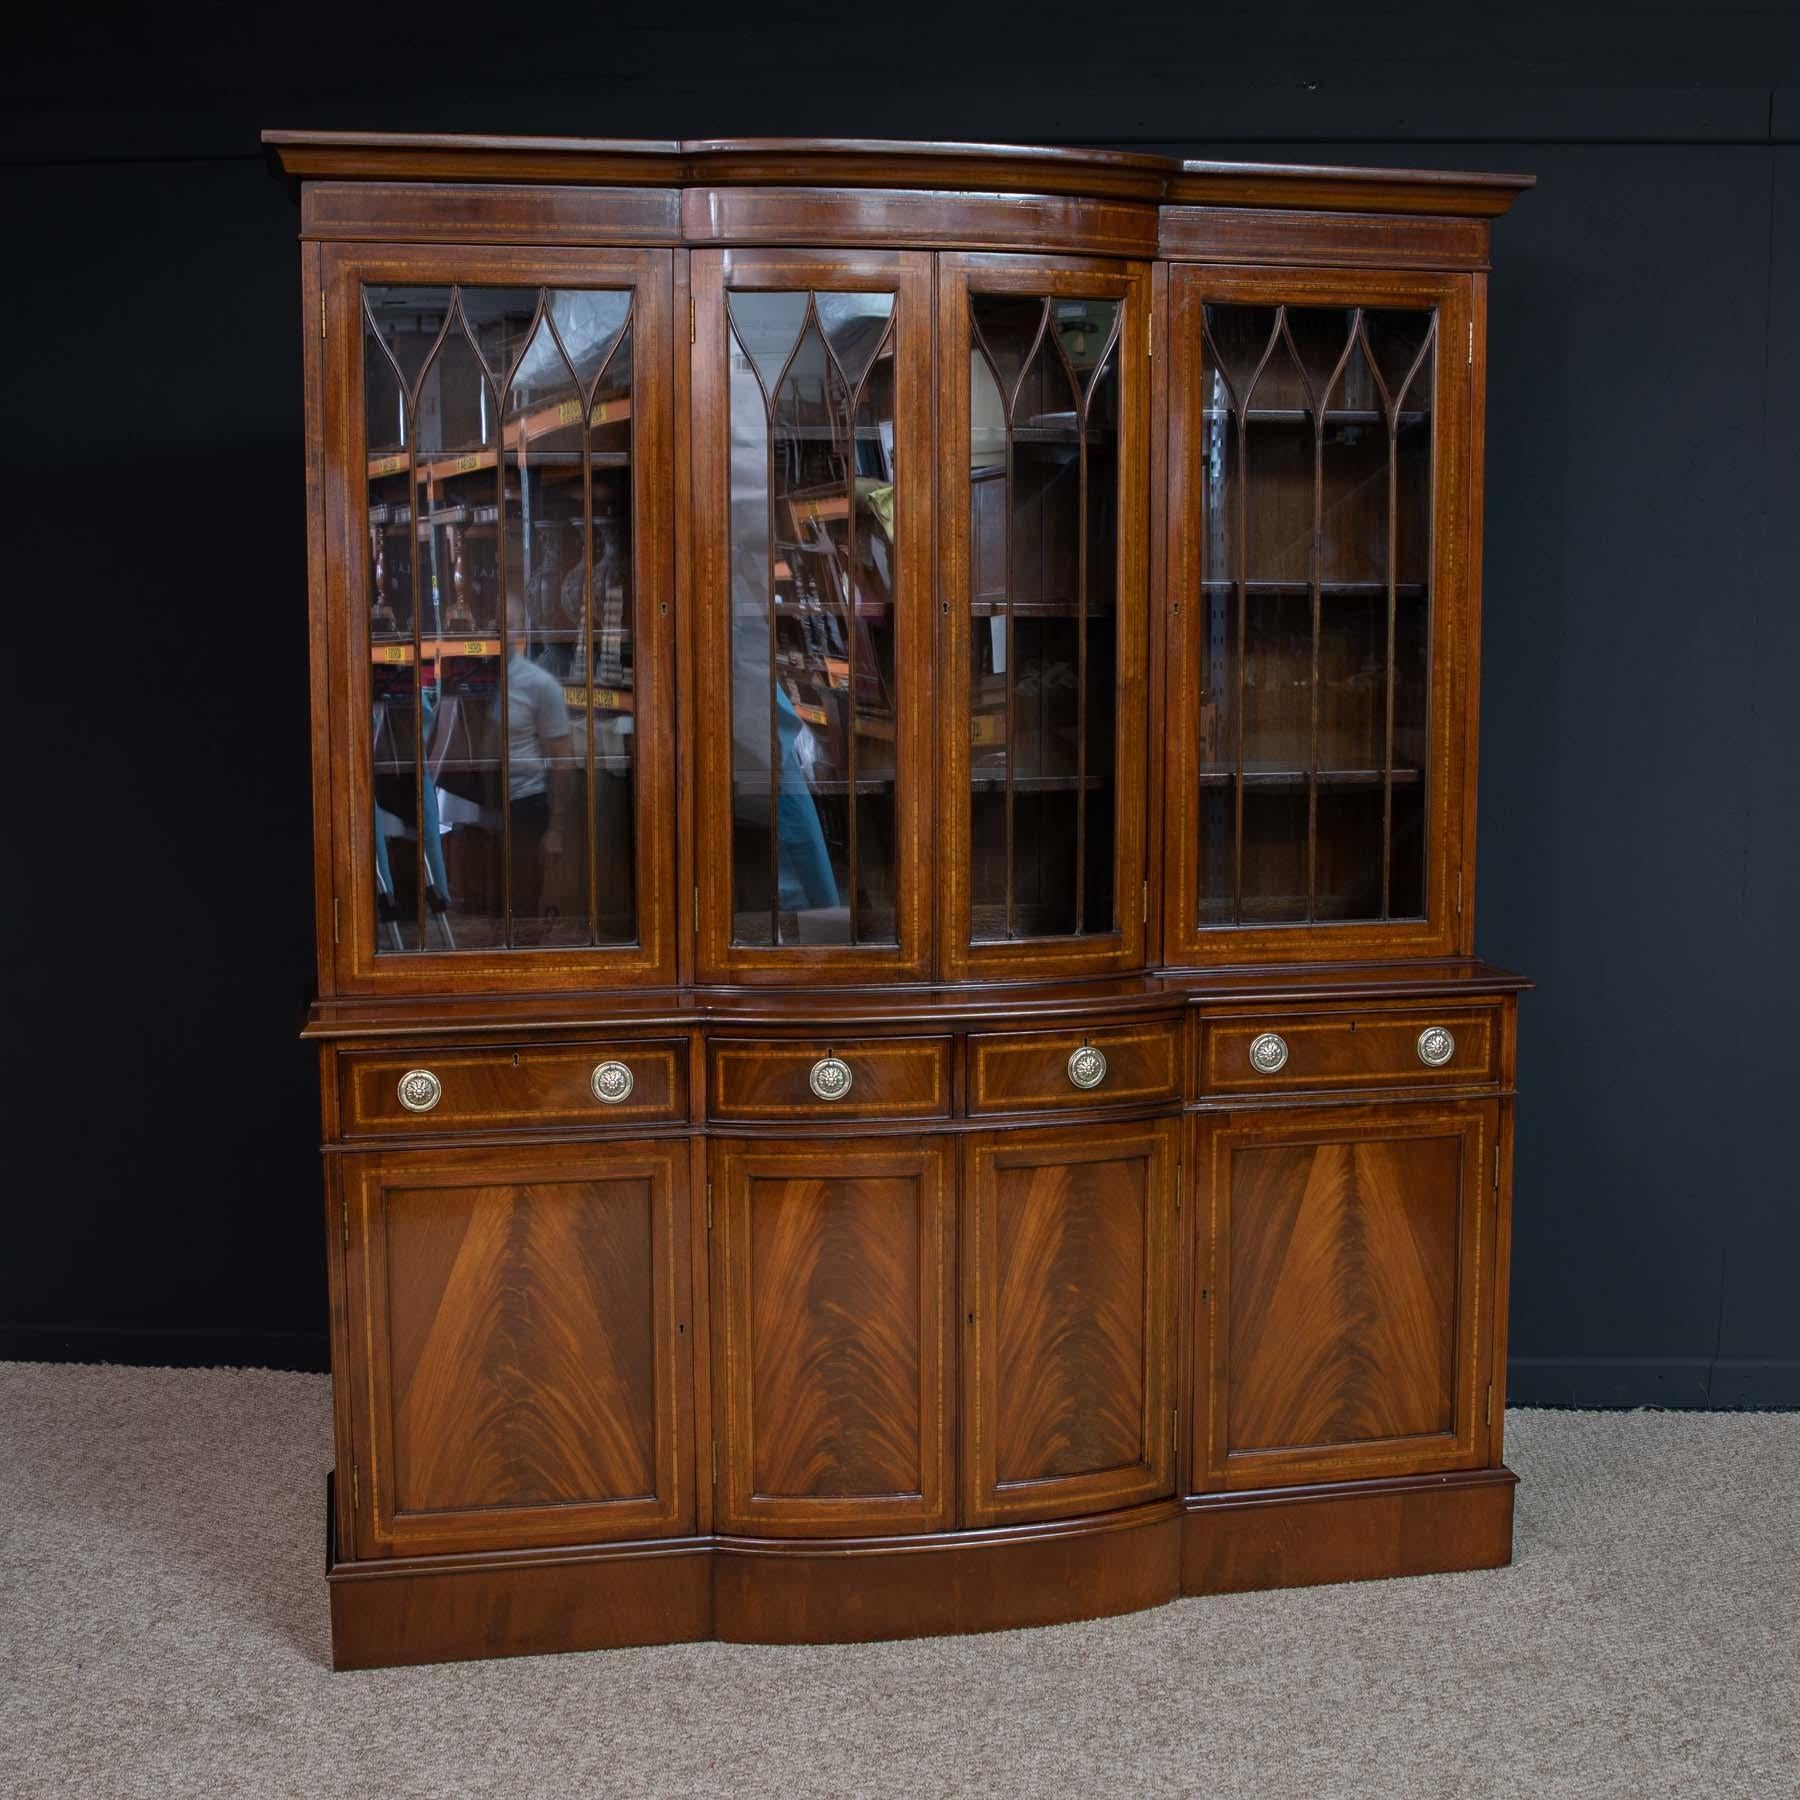 Mid-20th century mahogany bookcase in the Sheraton style. This is of excellent craftsmanship and quality. The central section is bow-fronted and the whole piece is cross-banded with satinwood and ebony. All keys and locks are working and the